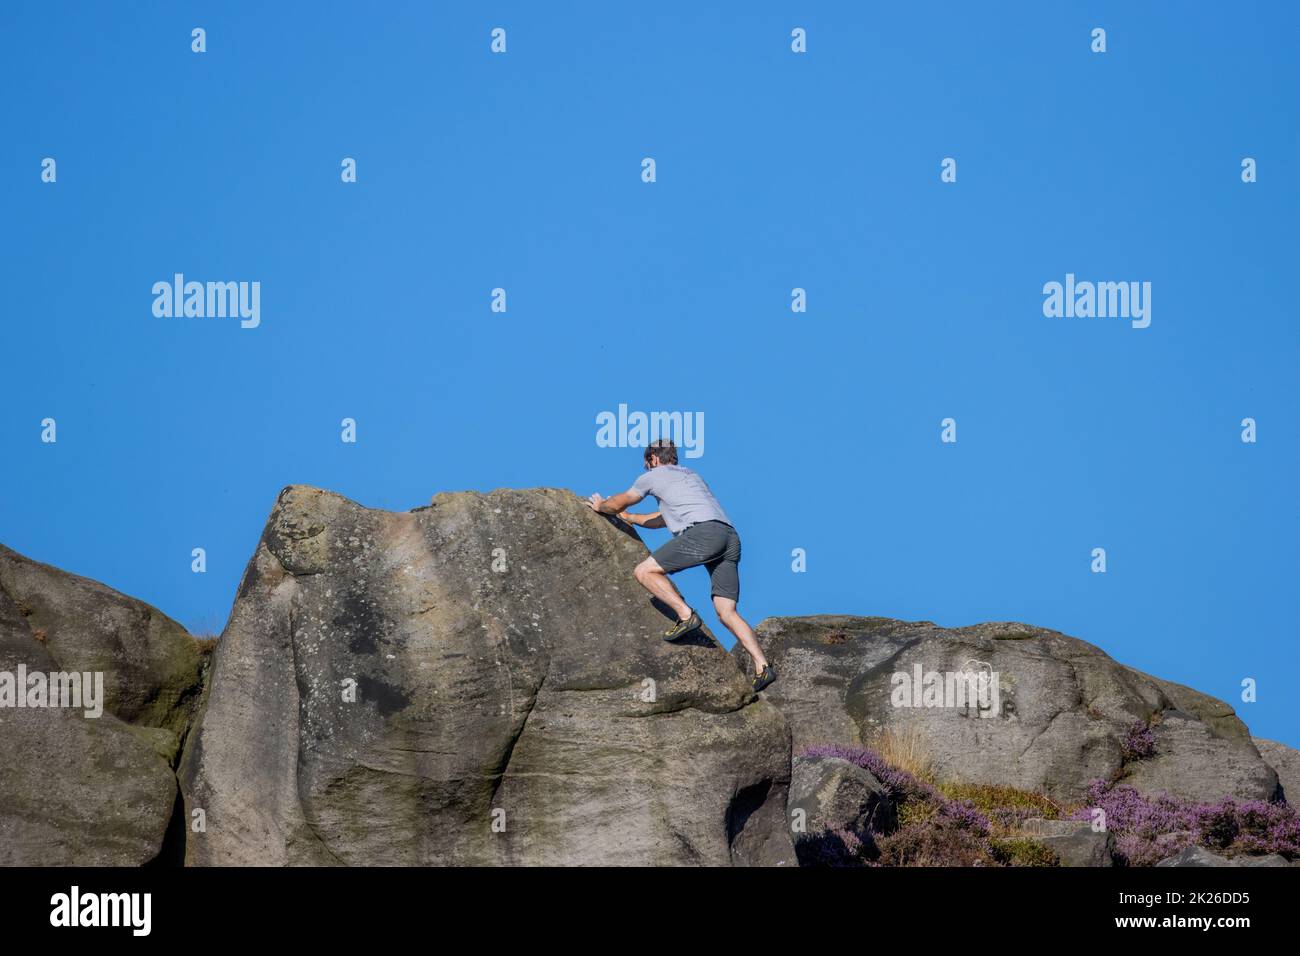 Man bouldering at the Cow and Calf Rocks at Ilkley Quarry, Ilkley Moor, West Yorkshire, England, UK Stock Photo